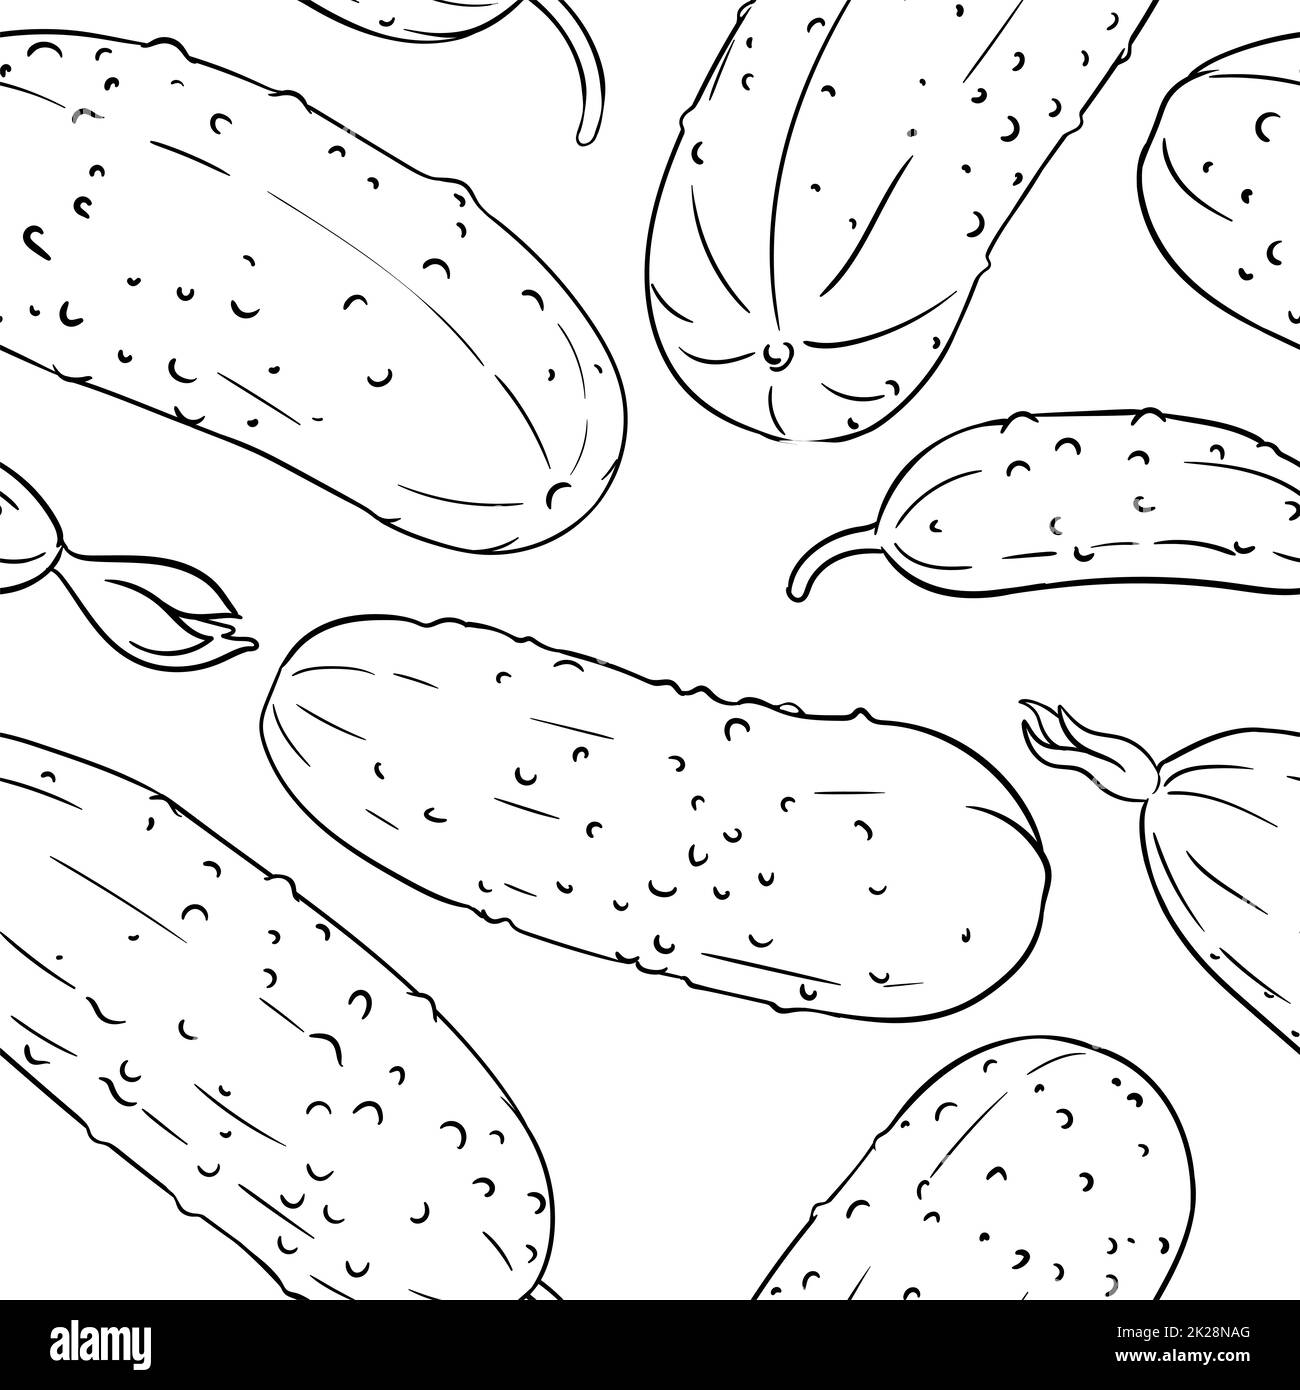 cucumber vegetable vector pattern Stock Photo